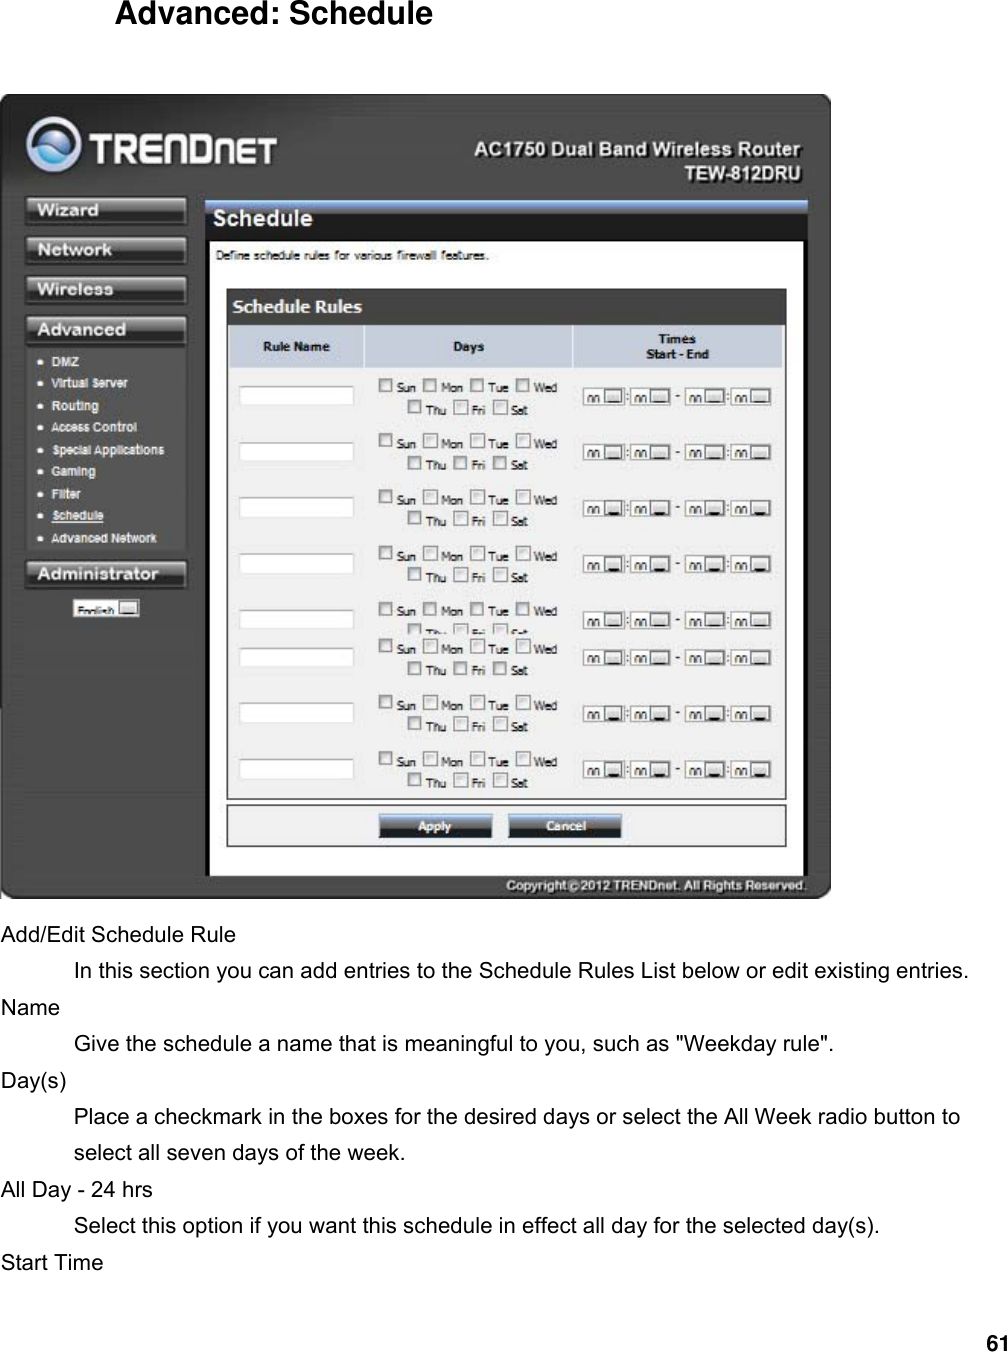 61  Advanced: Schedule   Add/Edit Schedule Rule   In this section you can add entries to the Schedule Rules List below or edit existing entries.   Name  Give the schedule a name that is meaningful to you, such as &quot;Weekday rule&quot;.   Day(s)  Place a checkmark in the boxes for the desired days or select the All Week radio button to select all seven days of the week.   All Day - 24 hrs   Select this option if you want this schedule in effect all day for the selected day(s).   Start Time   